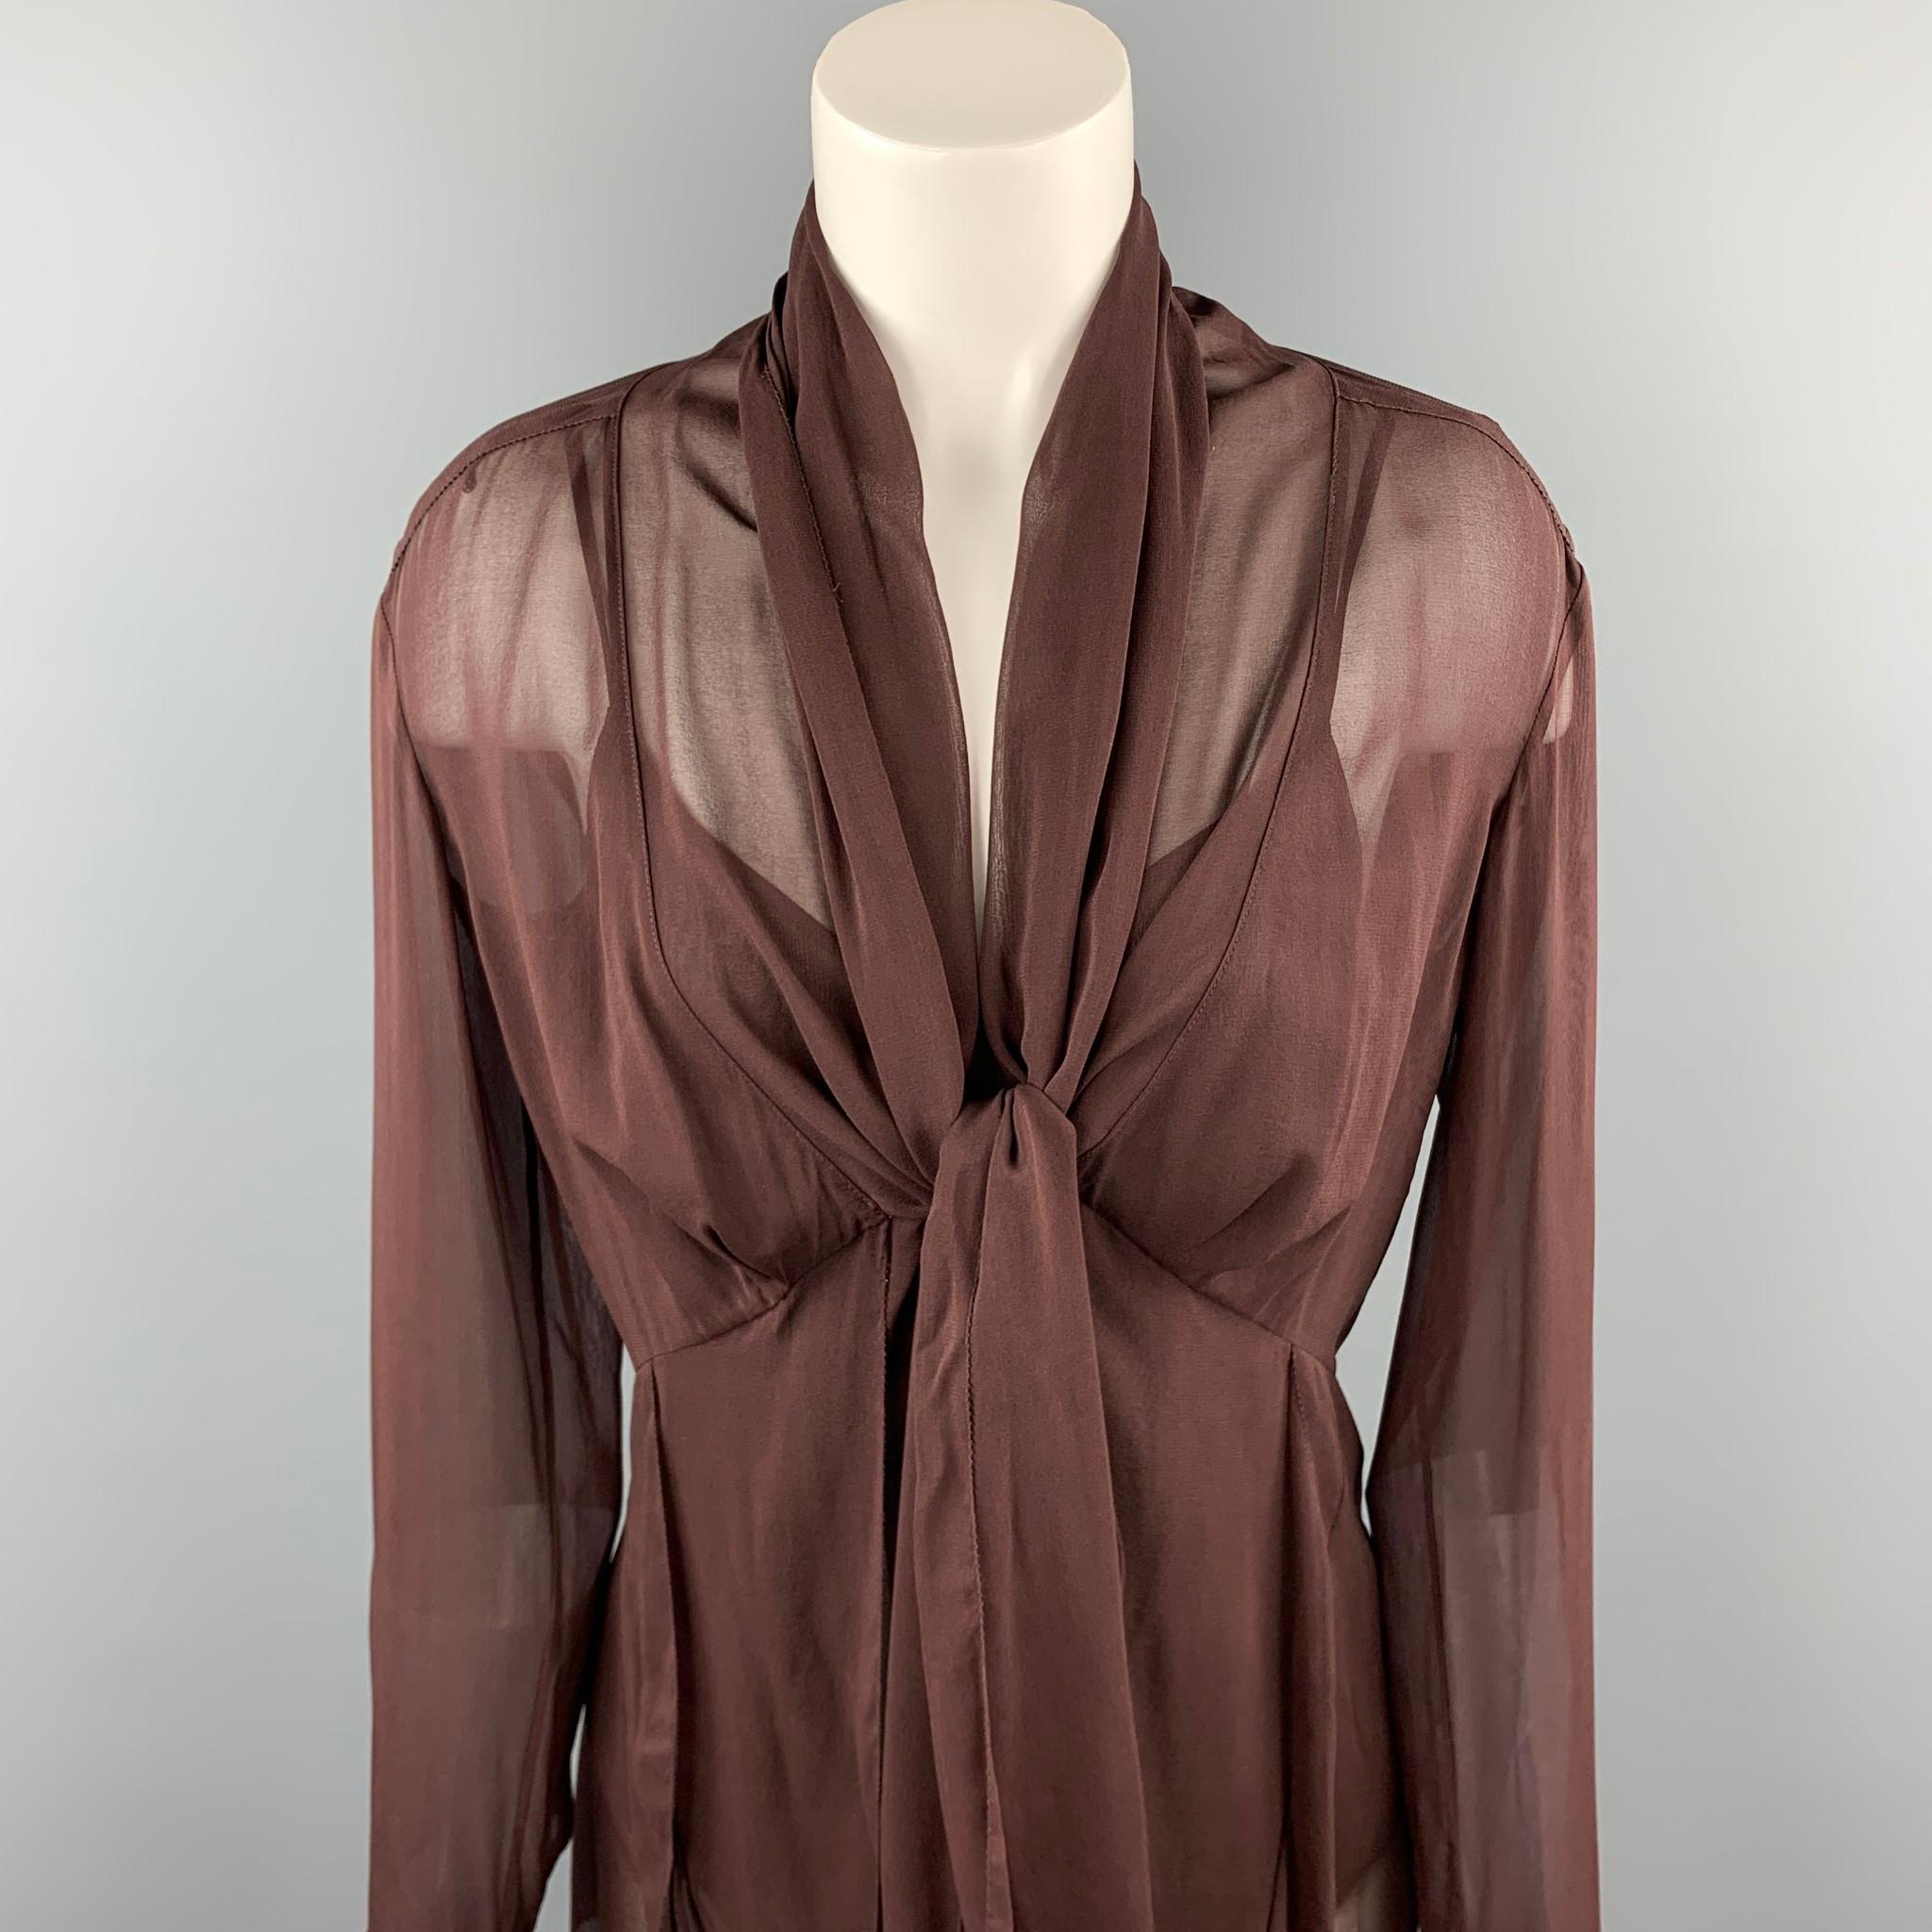 DONNA KARAN blouse comes in a burgundy  silk / elastane featuring a tie up style, buttoned sleeves, and includes a camisole top.

Good Pre-Owned Condition.
Marked: No size marked

Measurements:

Shoulder: 17 in. 
Bust: 38 in. 
Sleeve: 26 in.